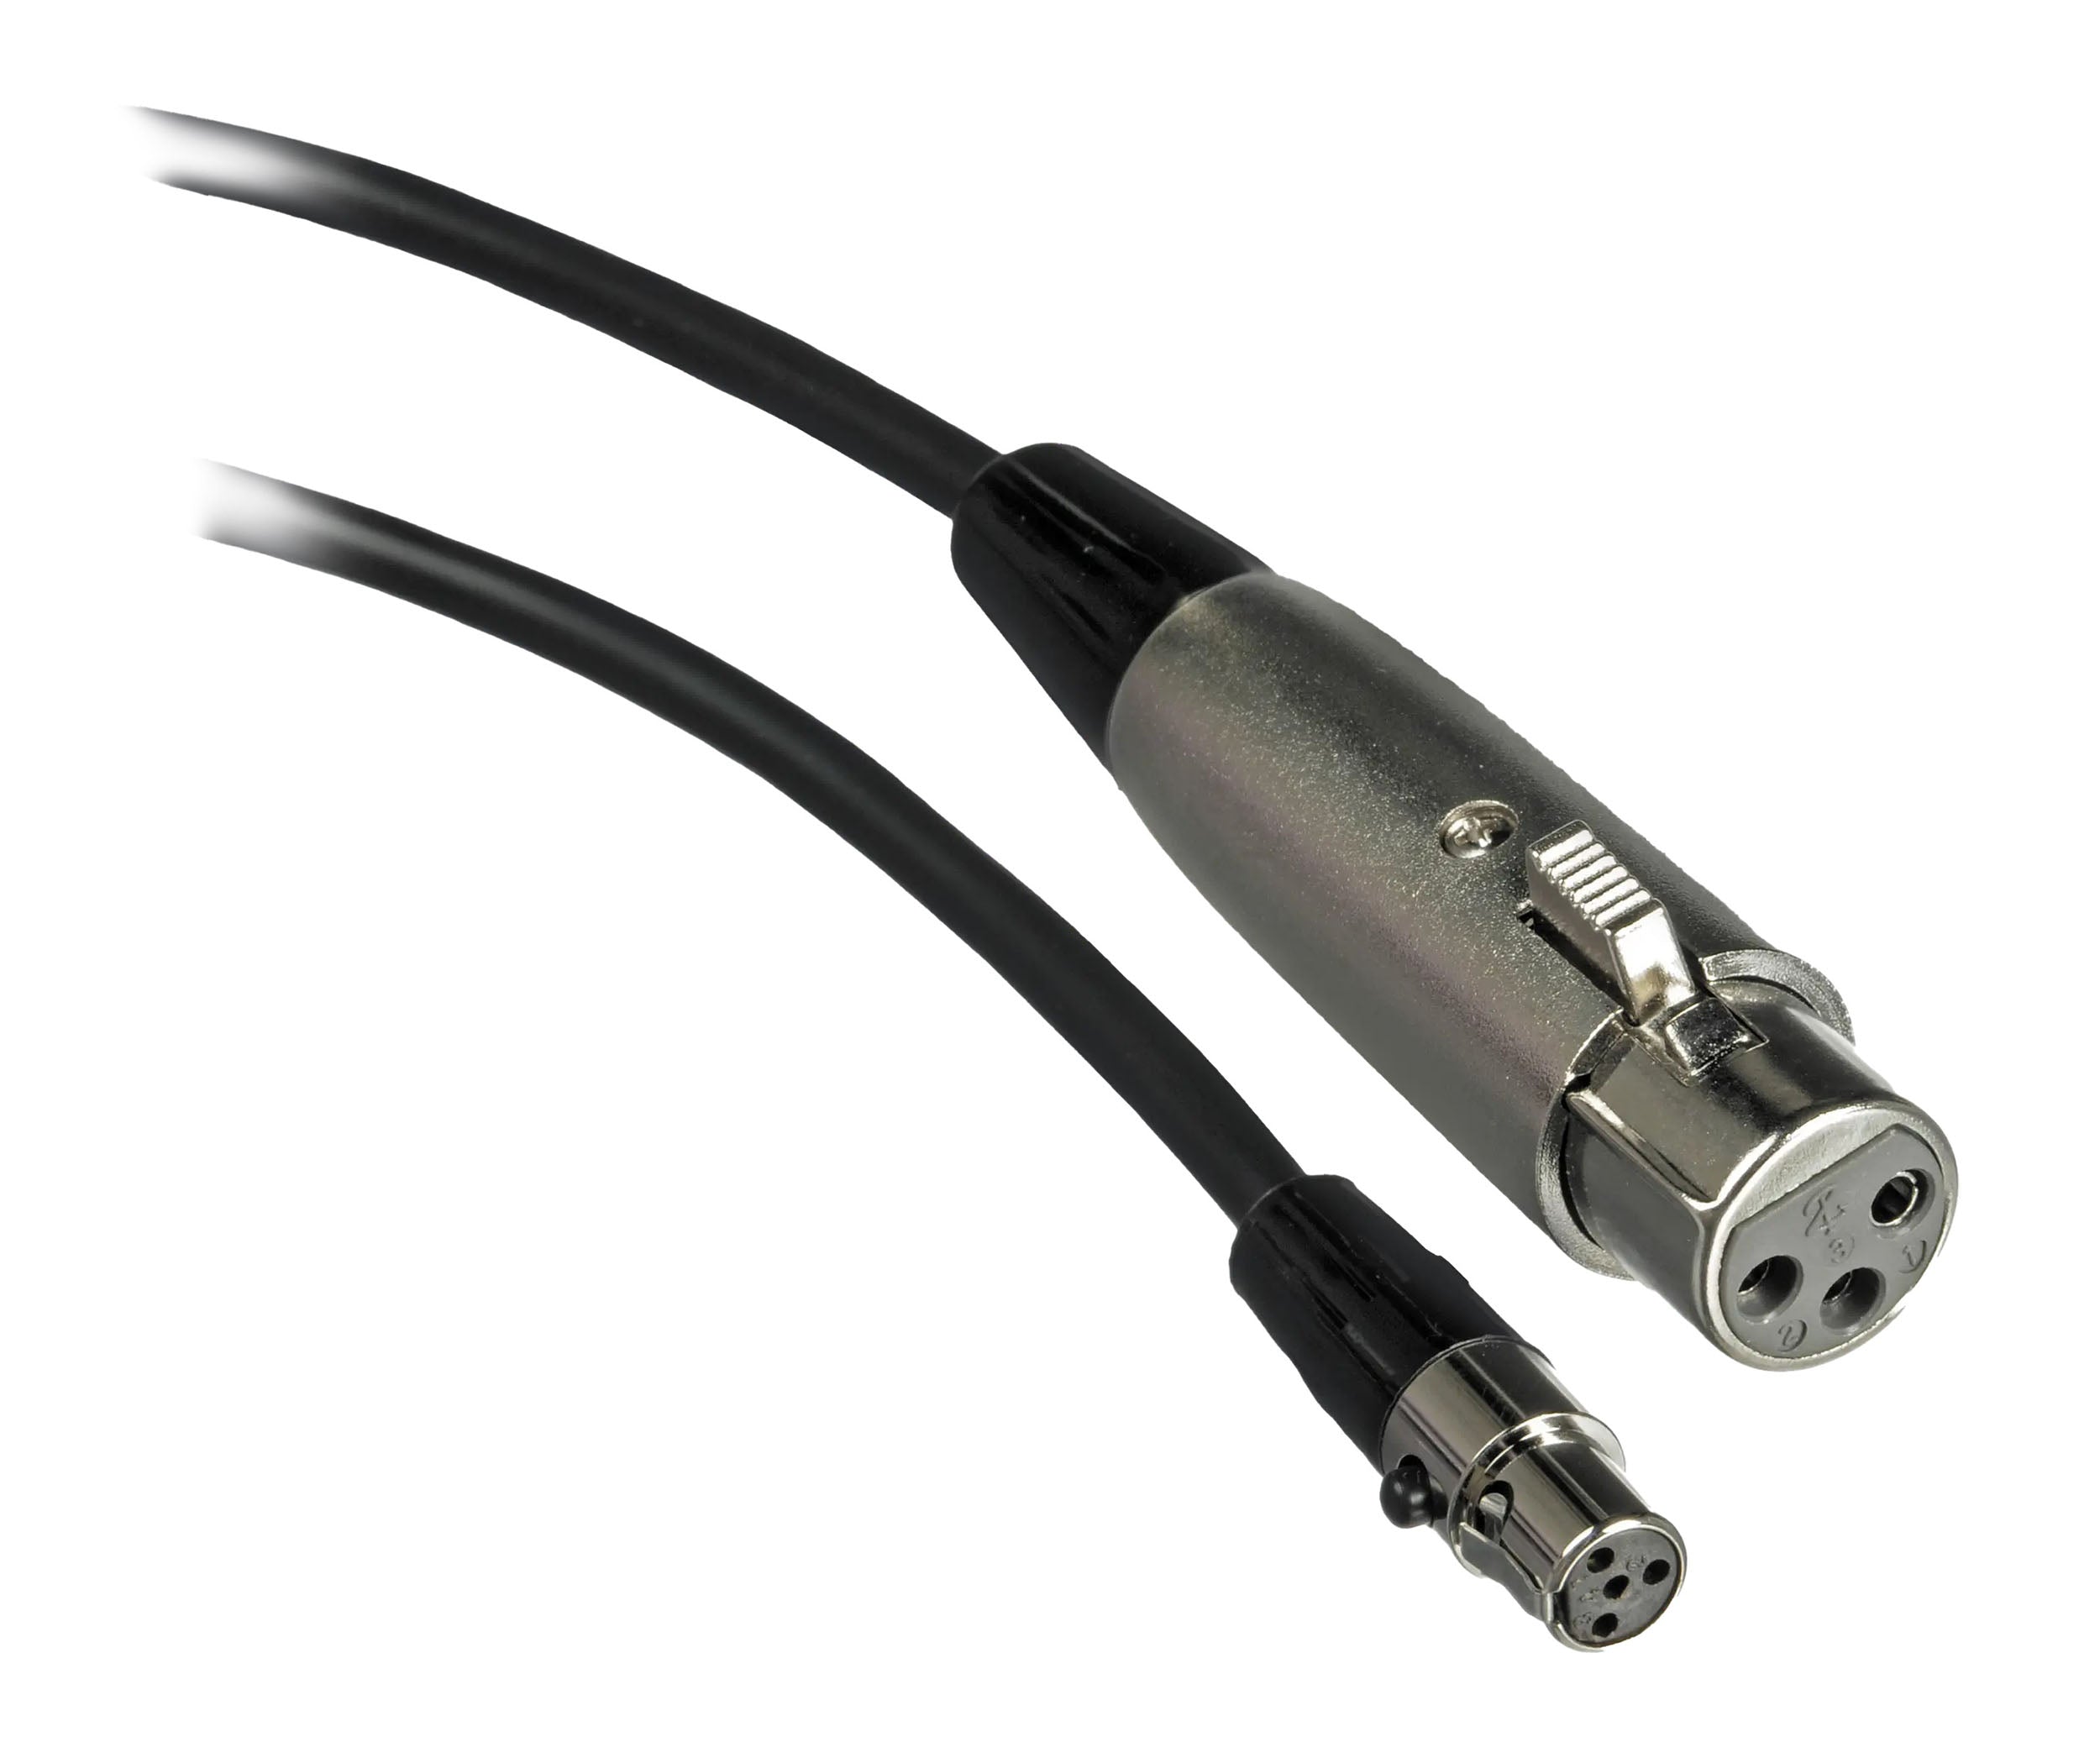 Shure WA310, Microphone Adapter Cable - 4 Ft by Shure